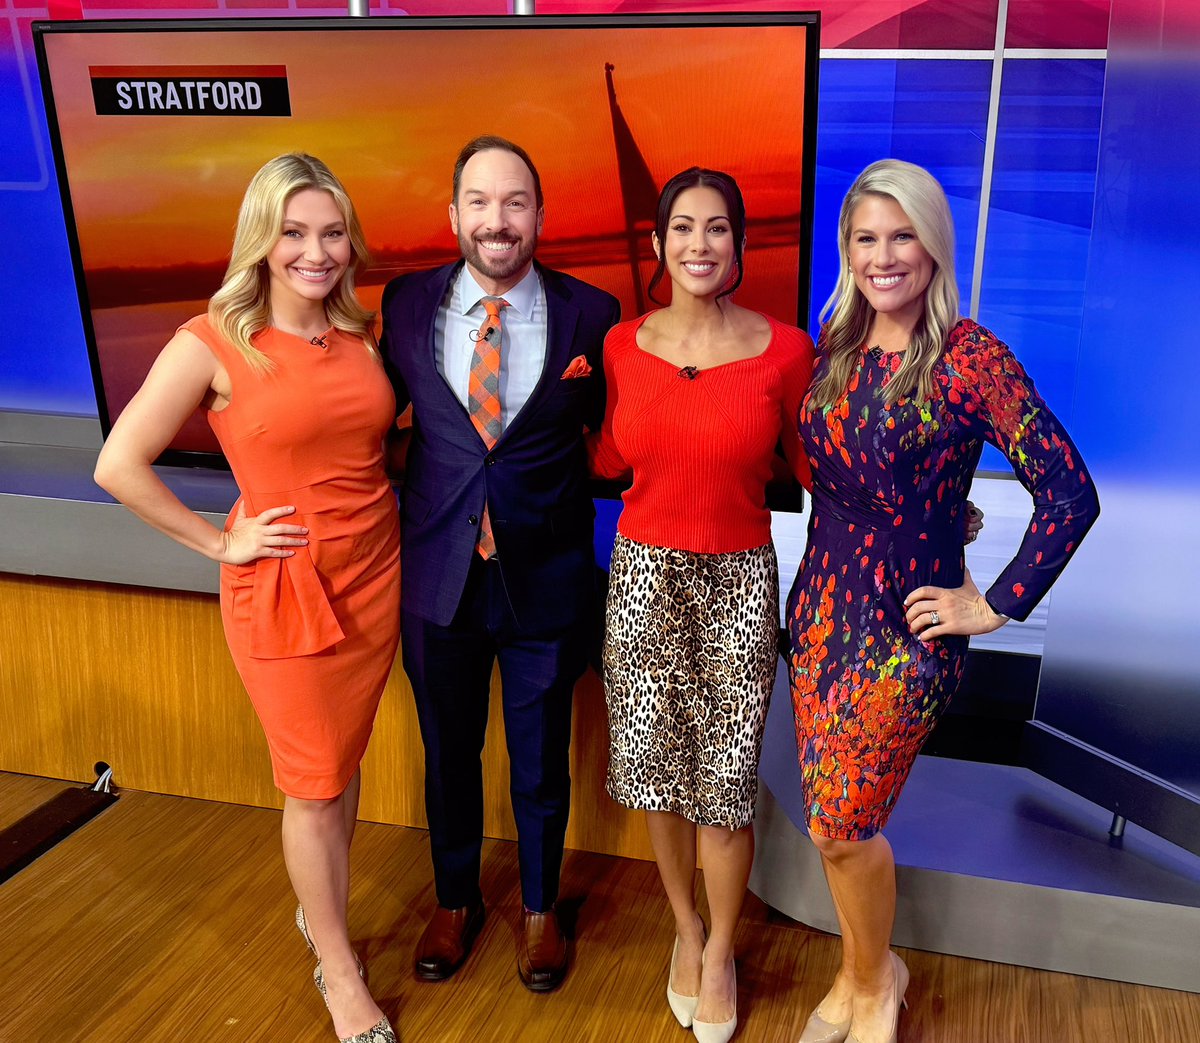 We’re all wearing orange for #GoOrangeDay! 

Raising awareness for work zone safety, with the goal of keeping construction workers safe on the roadways! 

Remember to drive slow, stay alert & move over for those DOT vehicles! @WTNH 🧡🦺